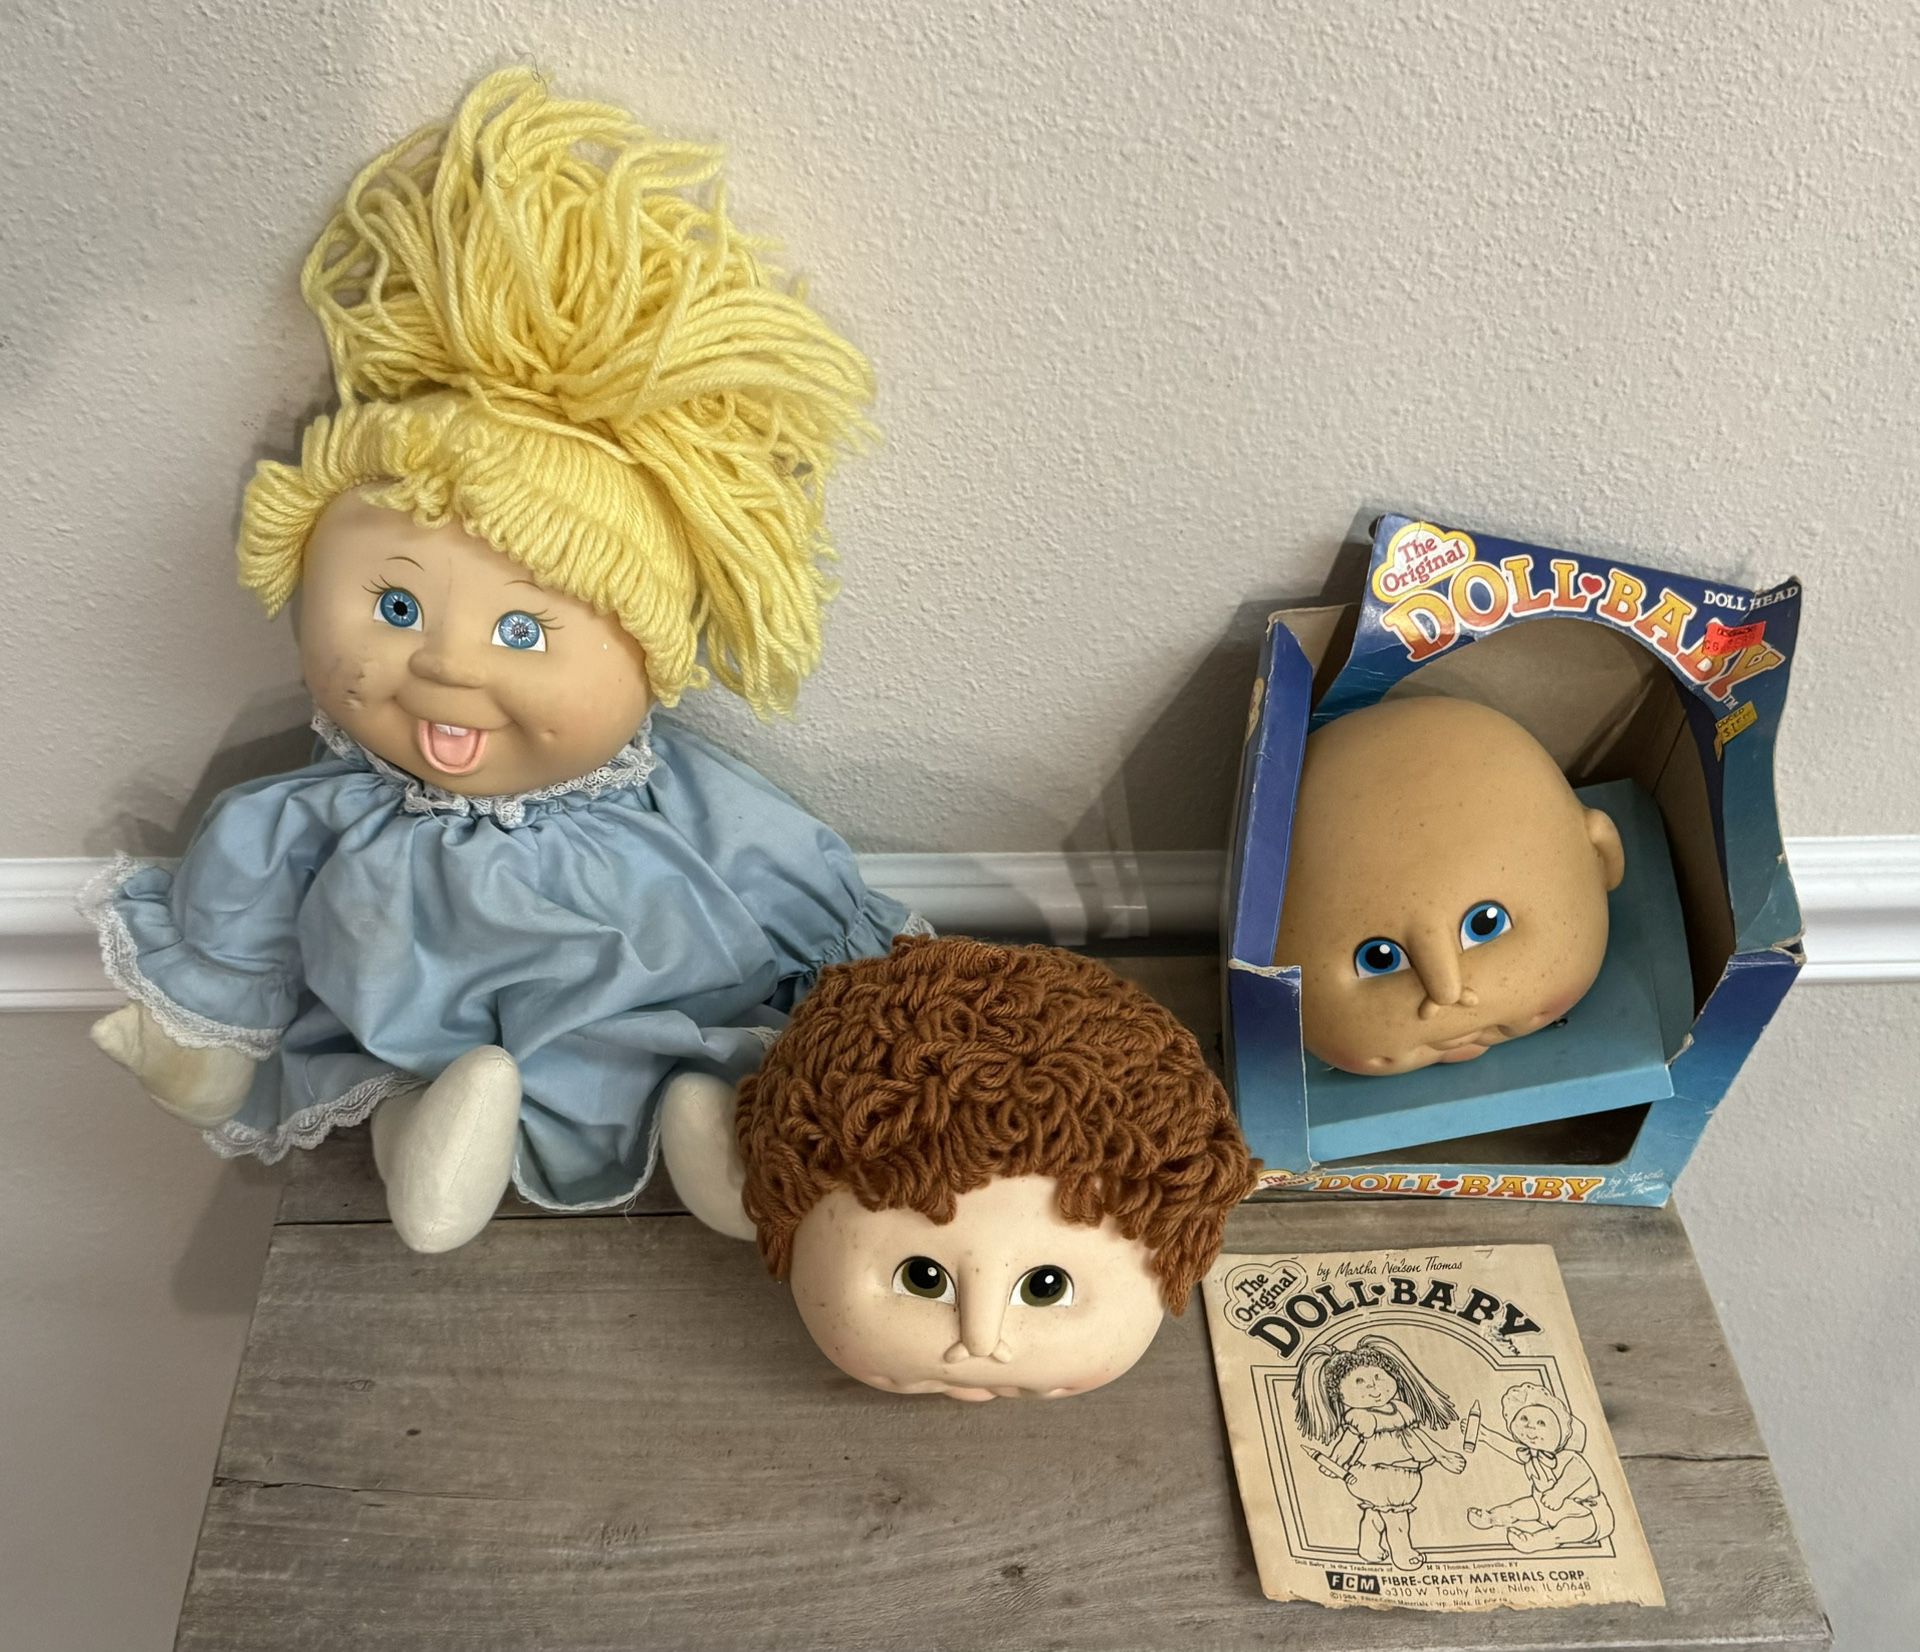 Vintage Doll Toy and The Original Doll Baby Heads $10 for all